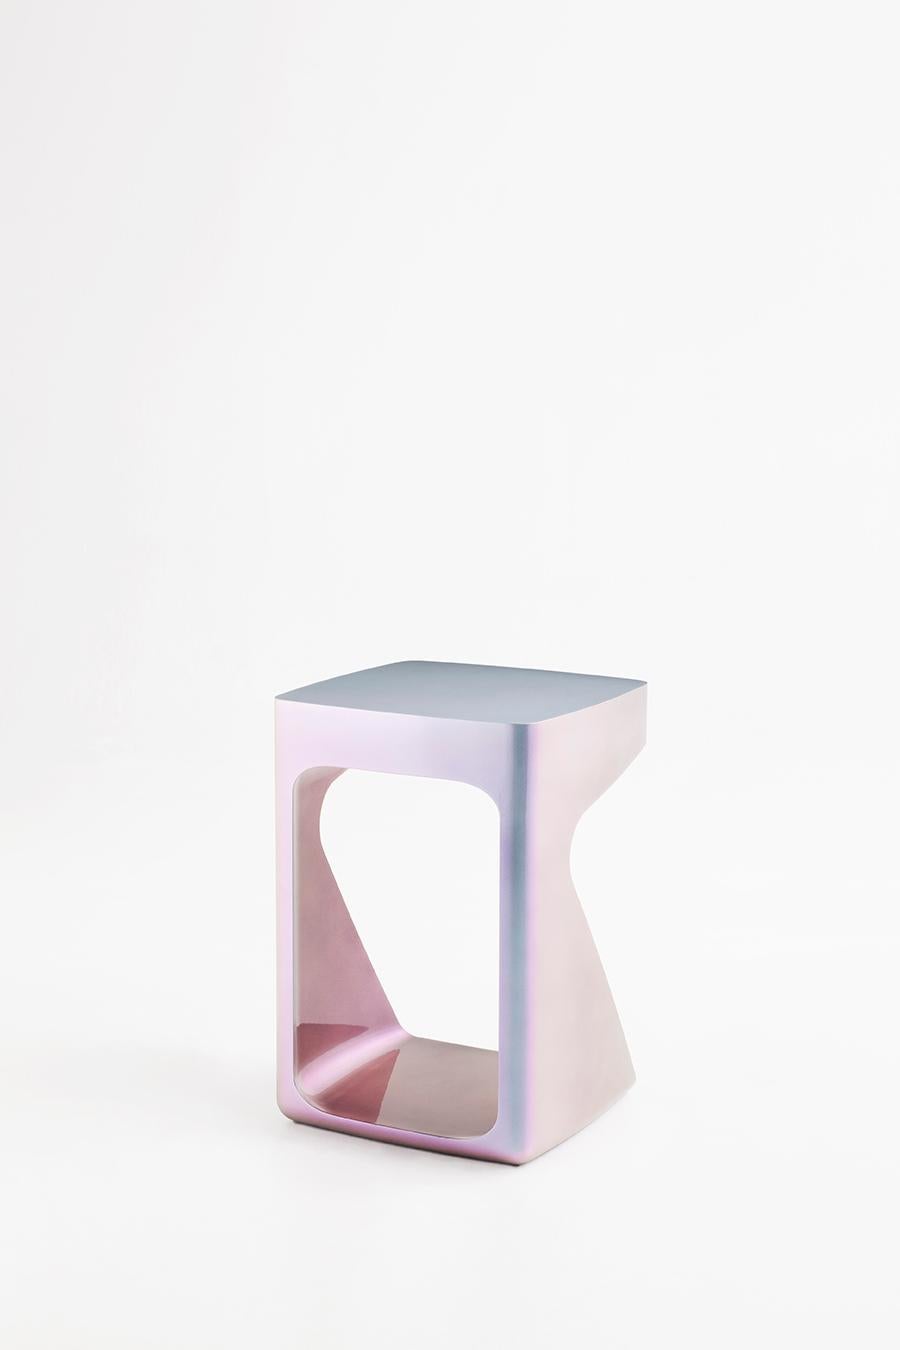 Spanish Adolfo Abejon Contemporary Design Limited Edition 'Orion' Sculptural Side Table